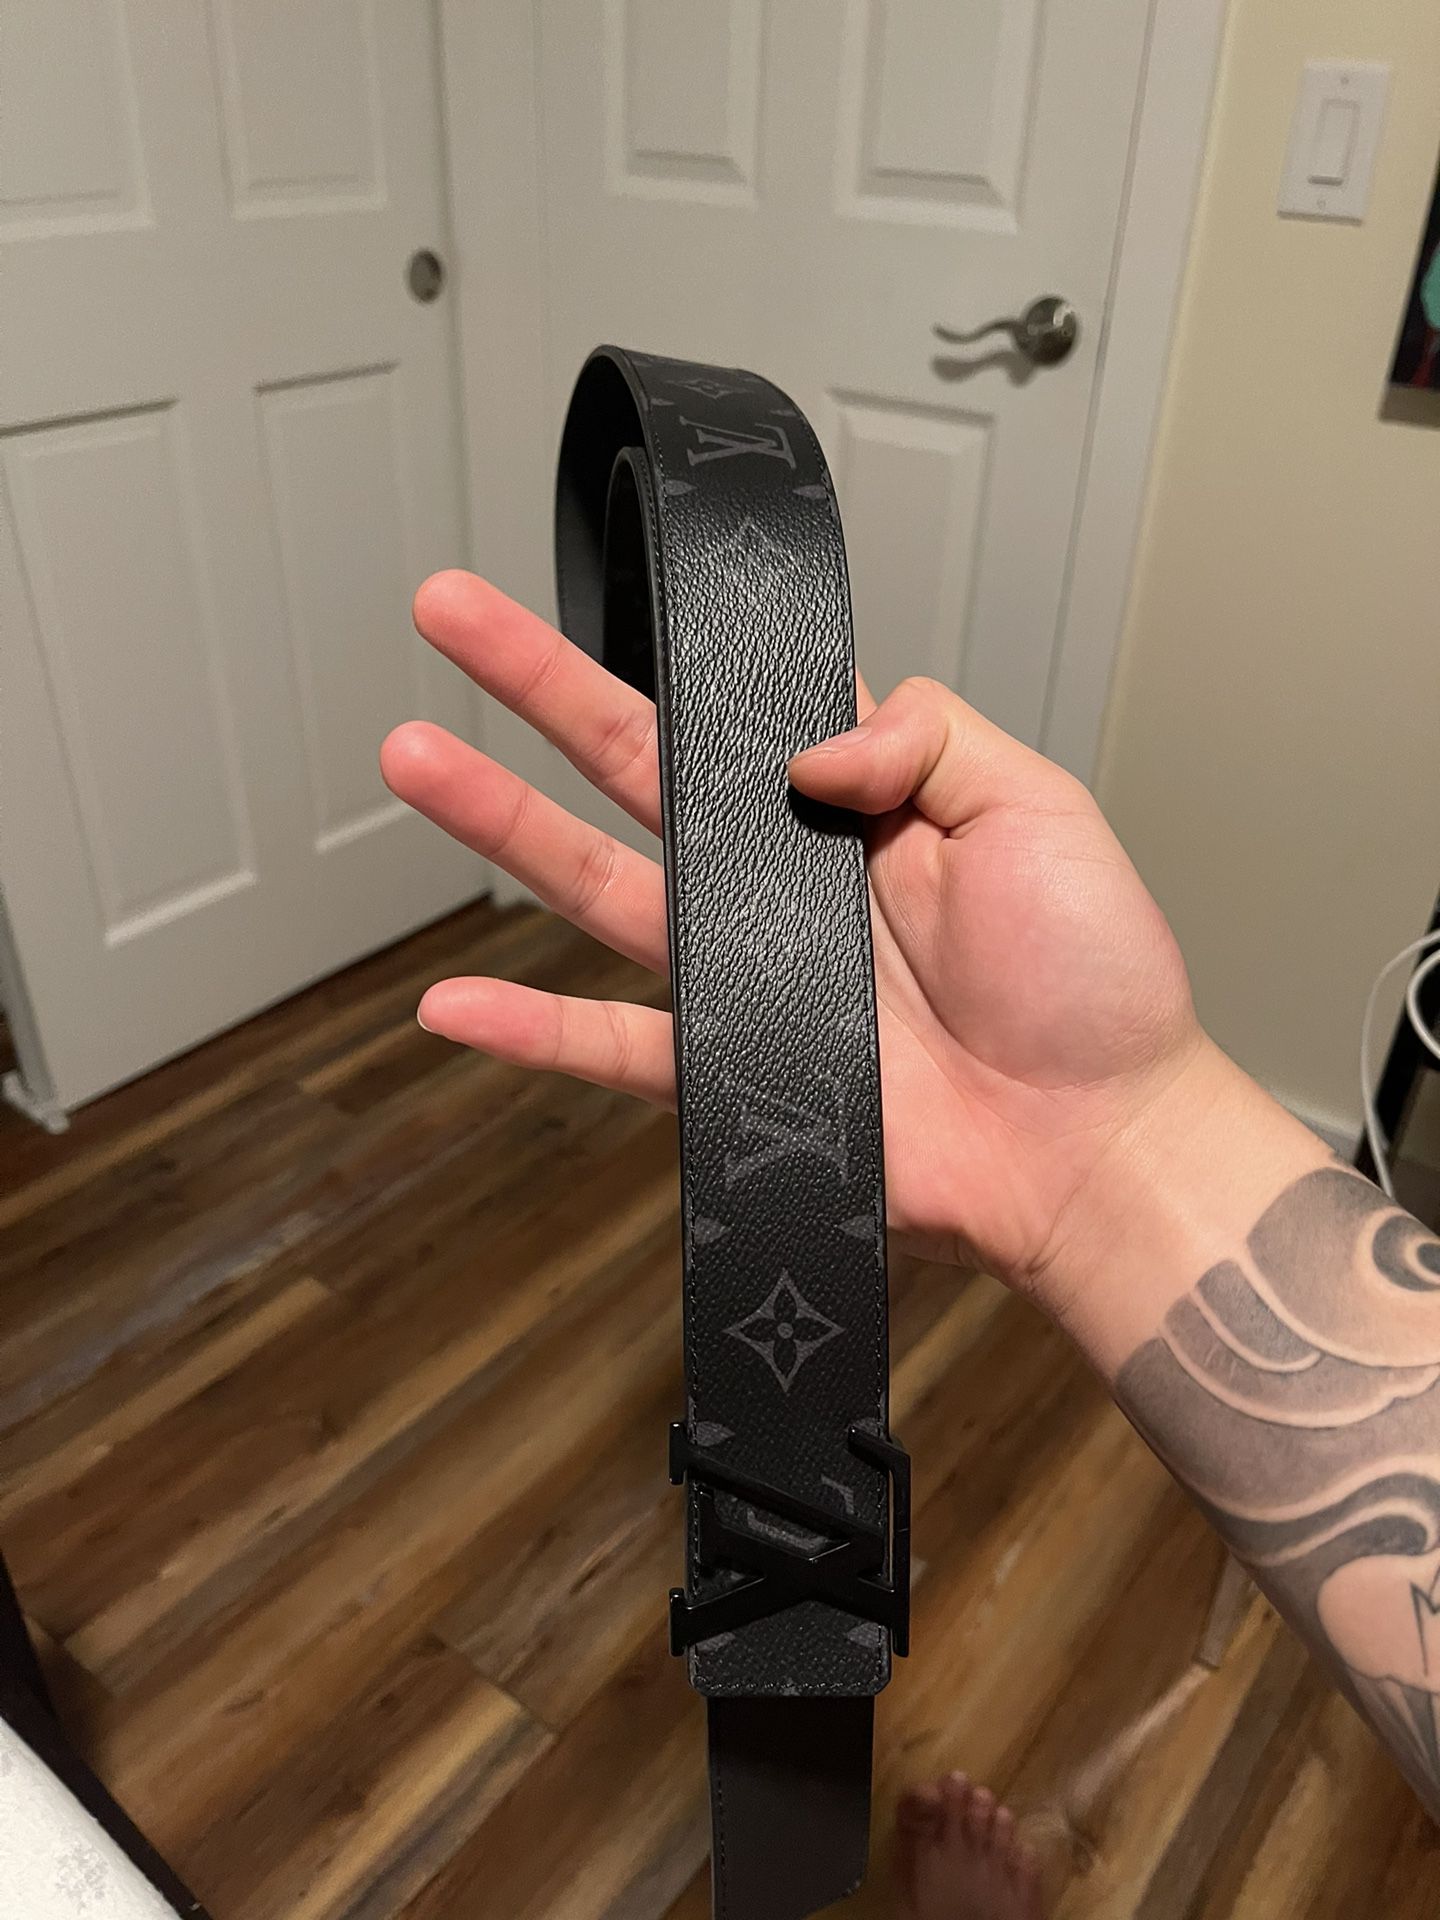 Louis Vuitton belt and wallet black LV initials for Sale in Orlando, FL